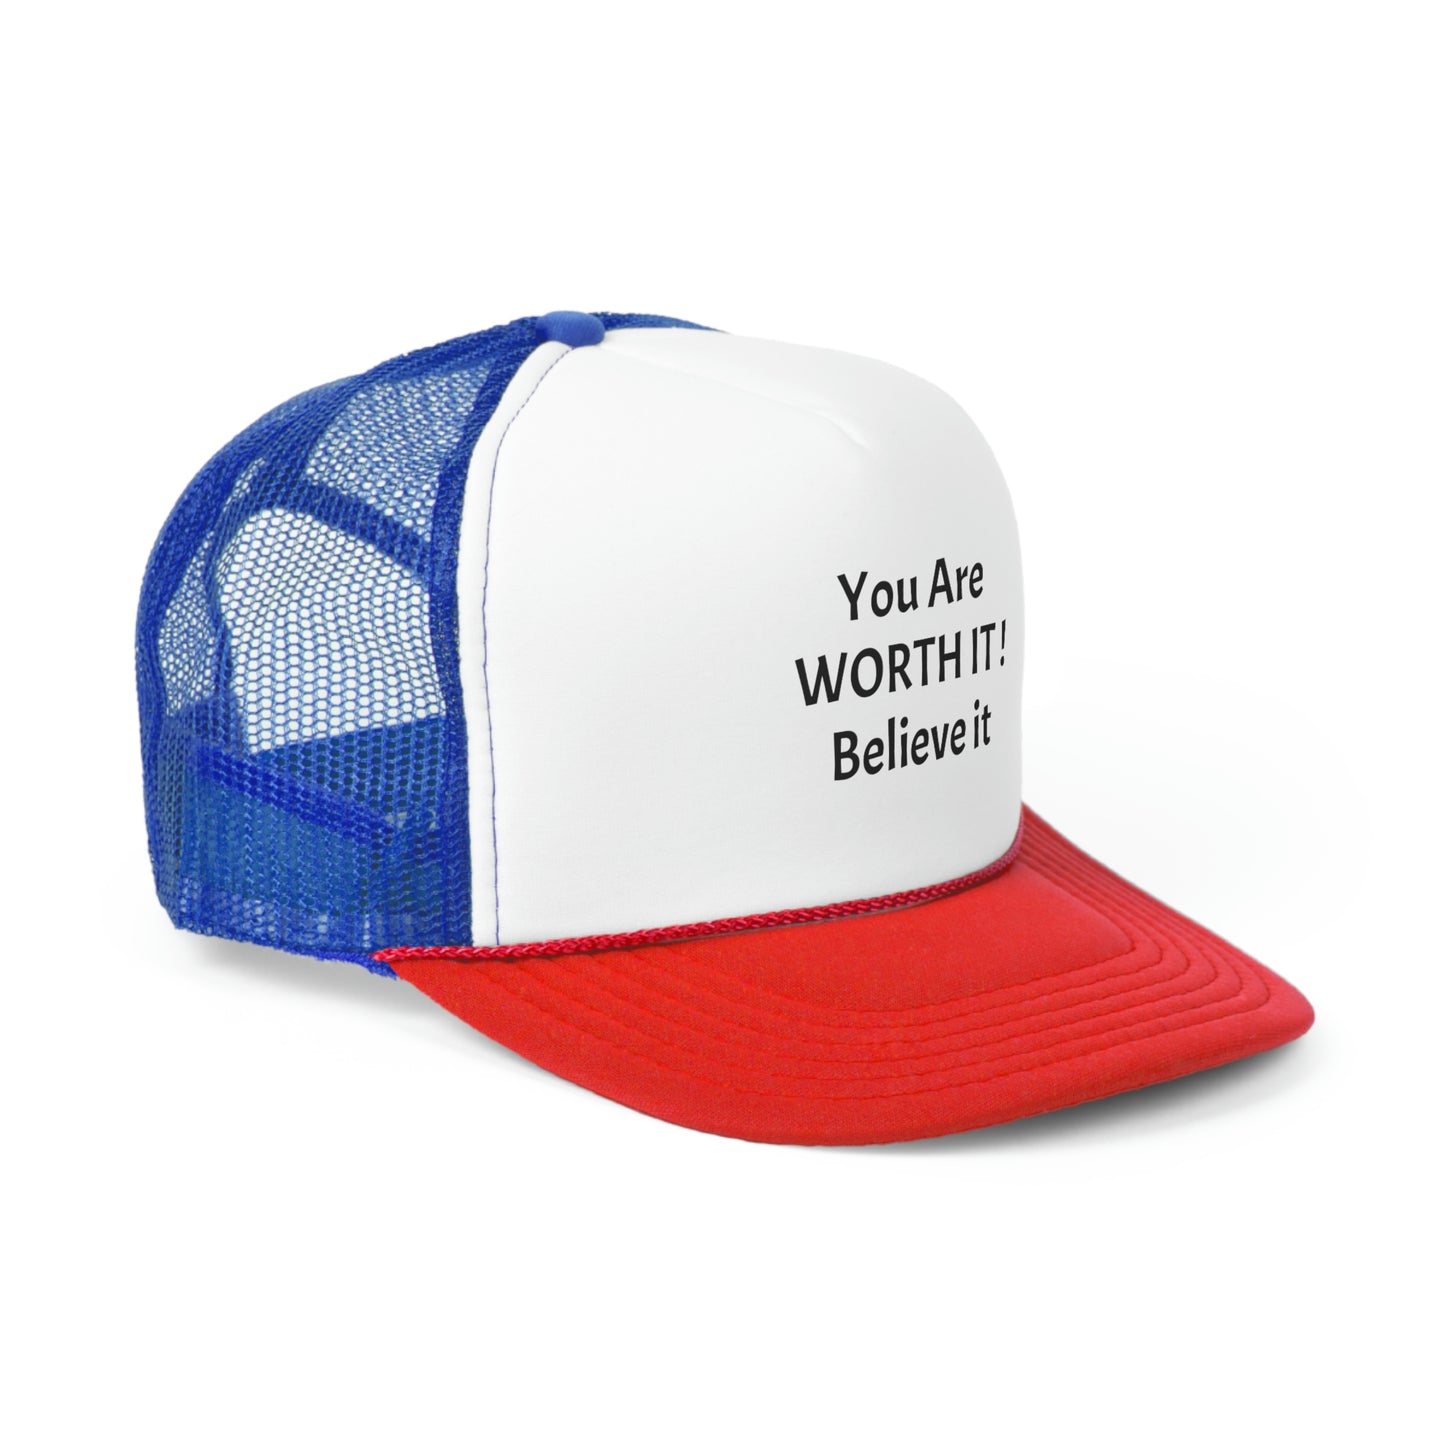 You Are Worth it ! Trucker Caps